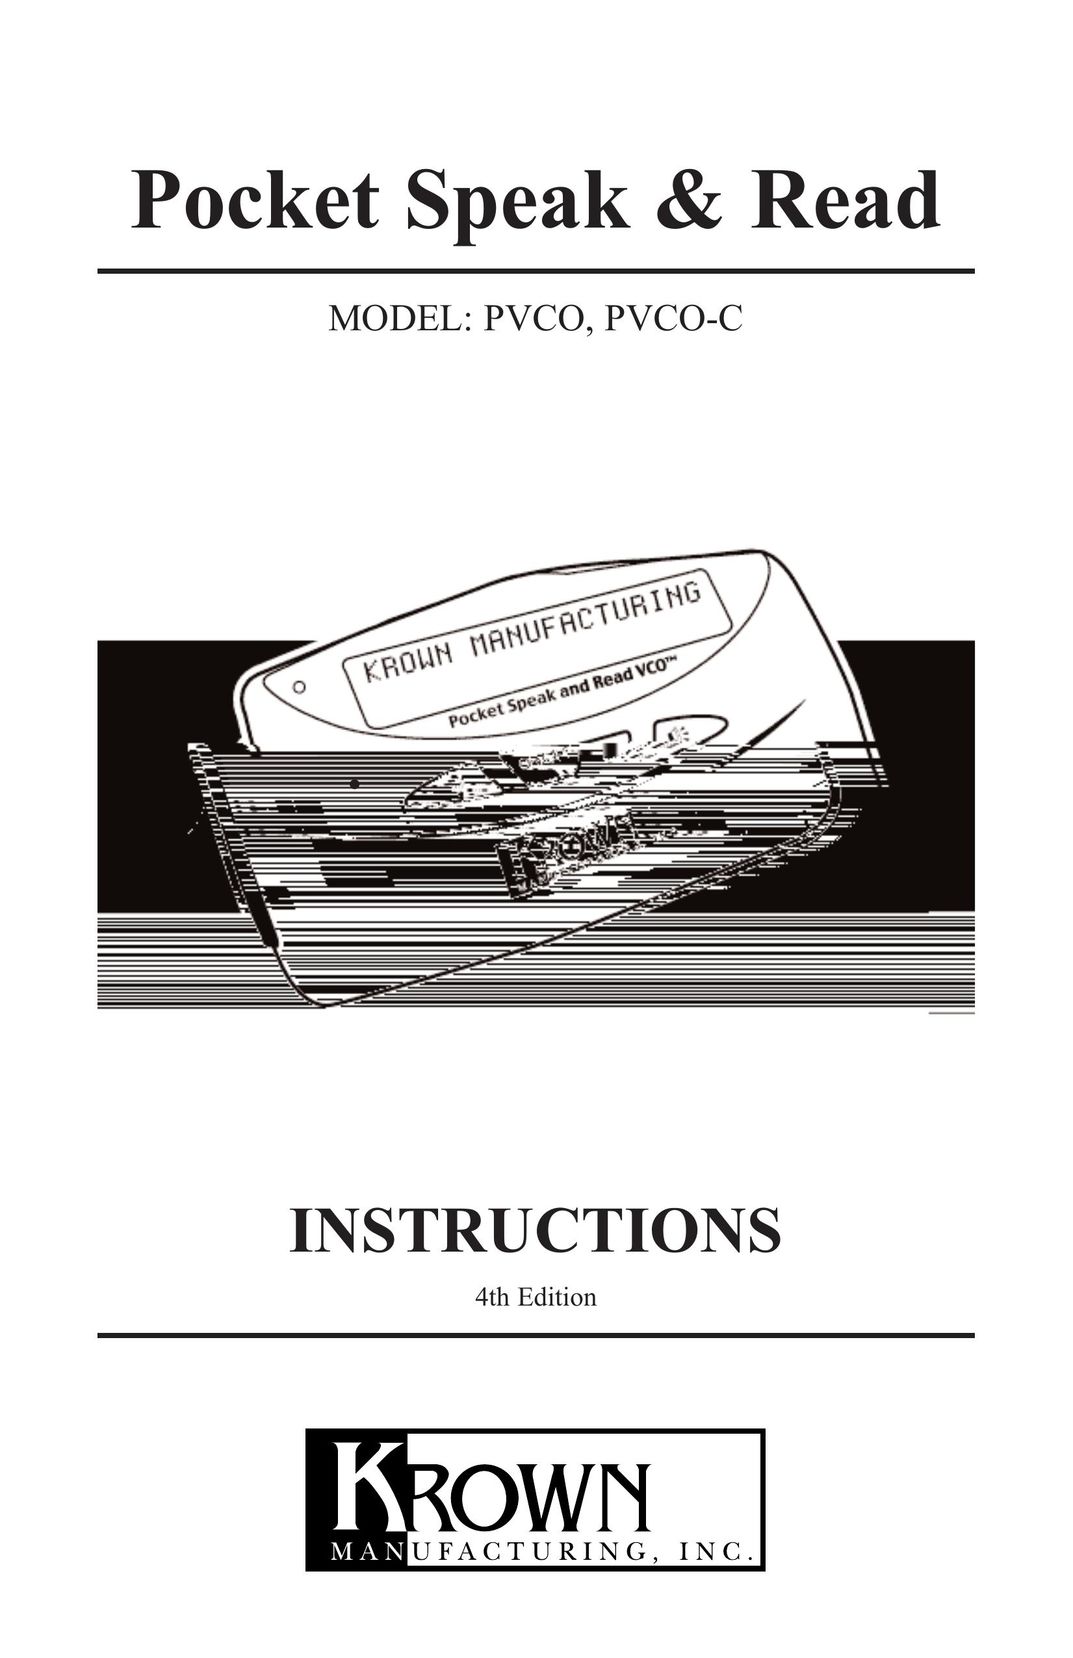 Krown Manufacturing PVCO-C Telephone User Manual (Page 1)